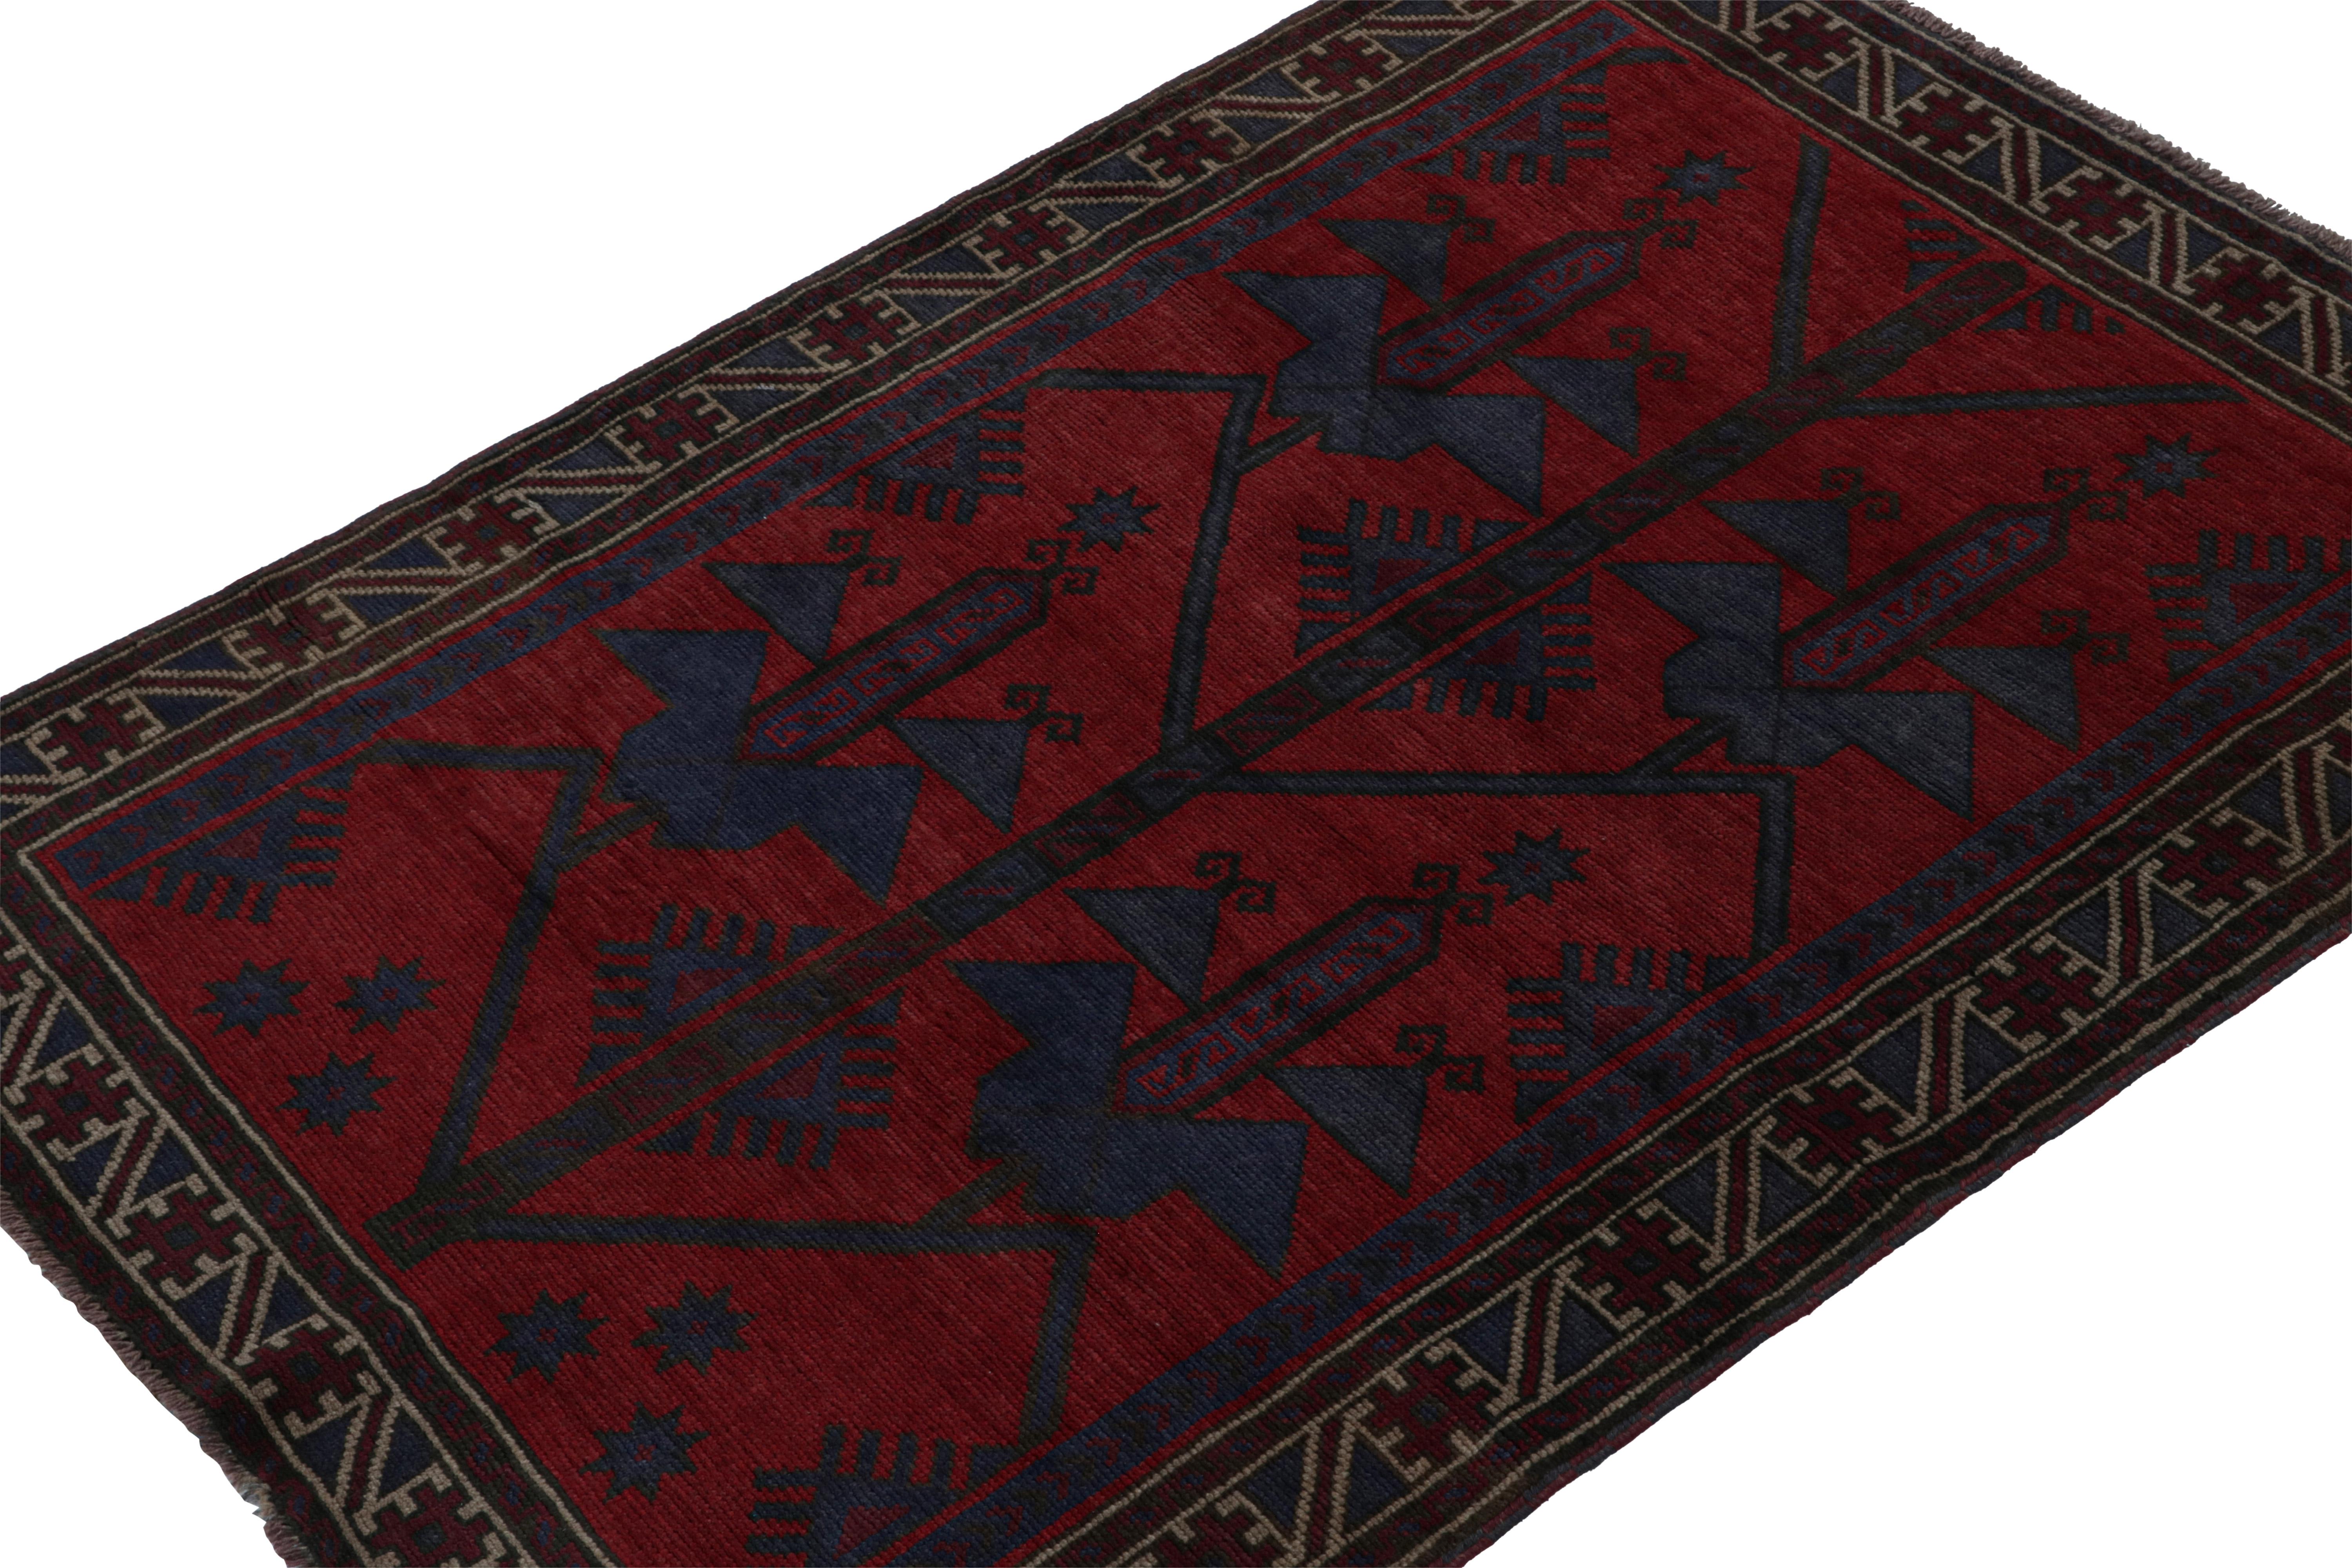 Hand-knotted in wool & goat hair, this vintage tribal rug of the 1950s is a coveted addition to Rug & Kilim’s Antique & Vintage collection. 

On the Design: 

Coming from the Baluch tribe, this 5x6 rug boasts traditional patterns in rich red & navy